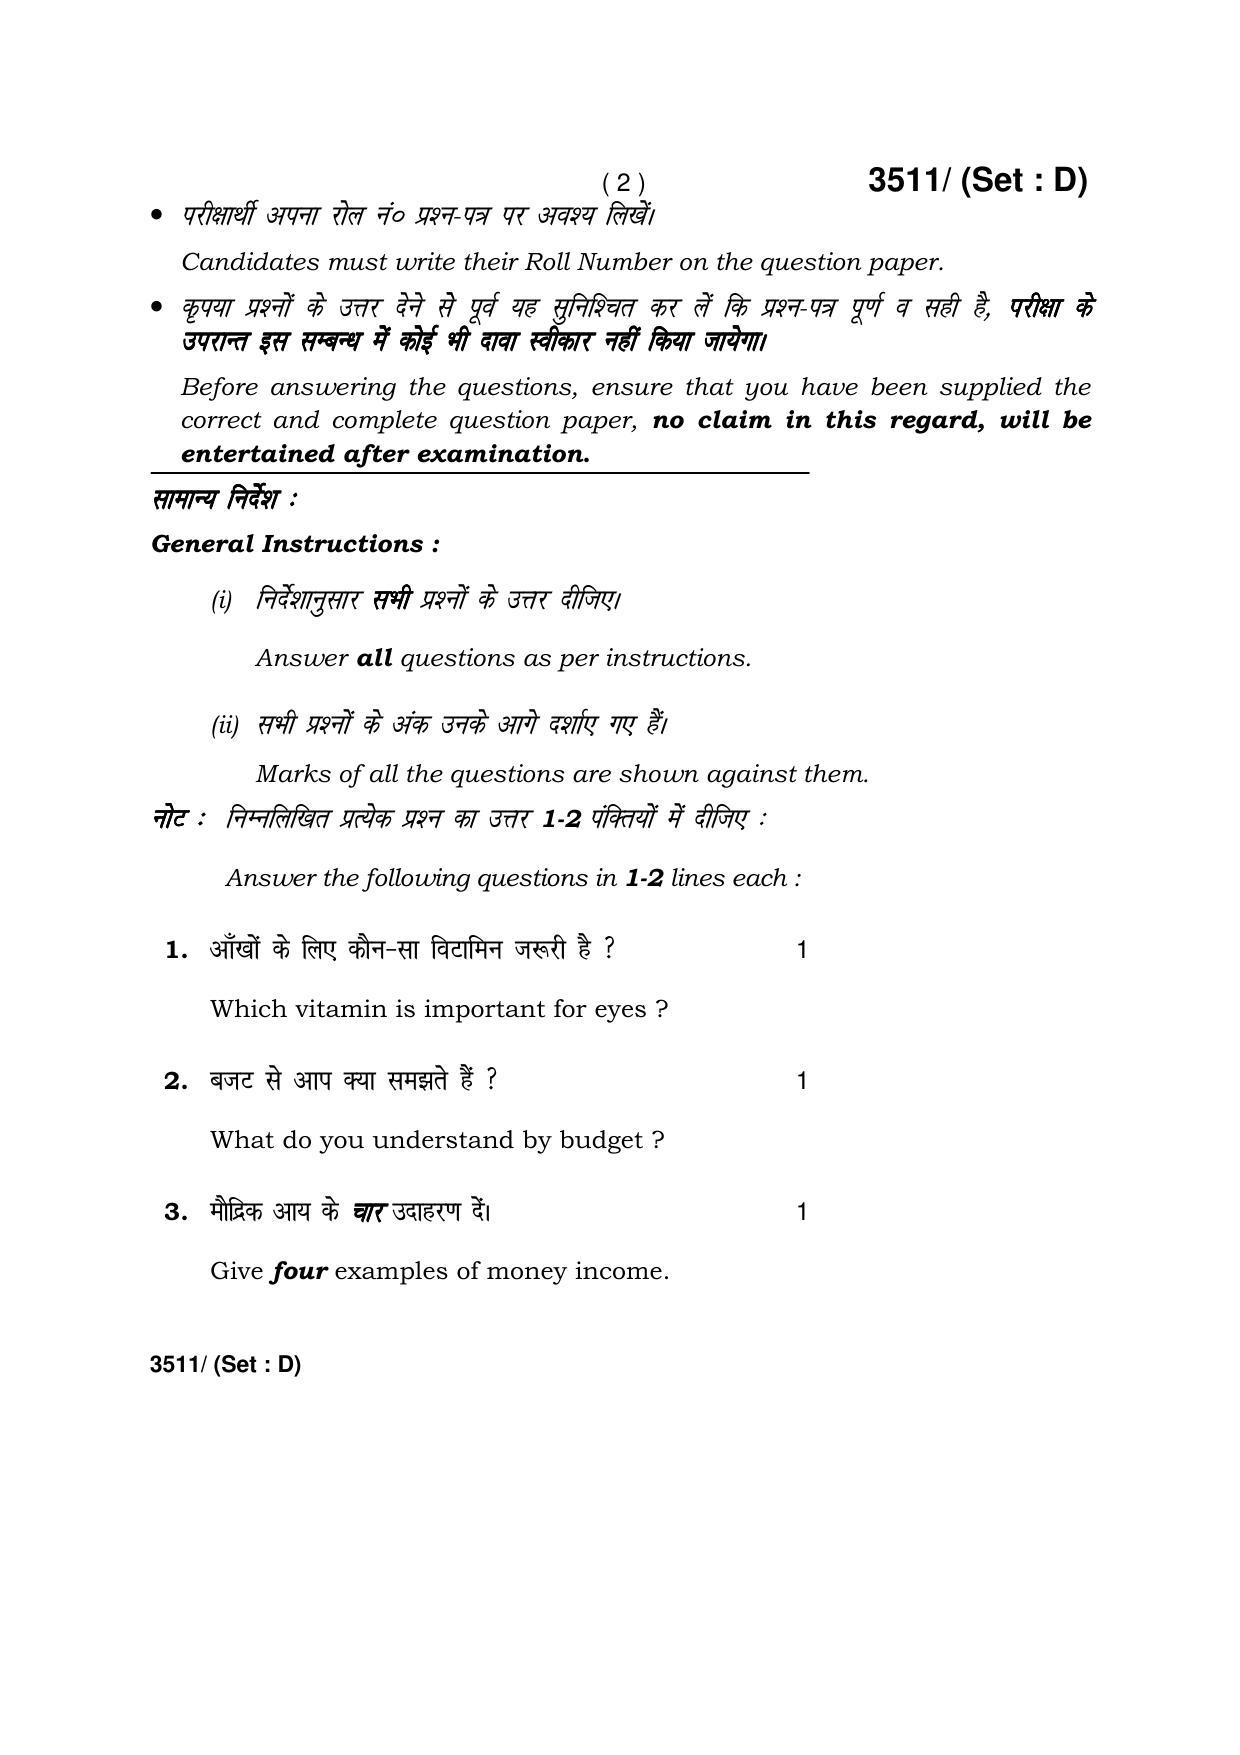 Haryana Board HBSE Class 10 Home Science -D 2018 Question Paper - Page 2